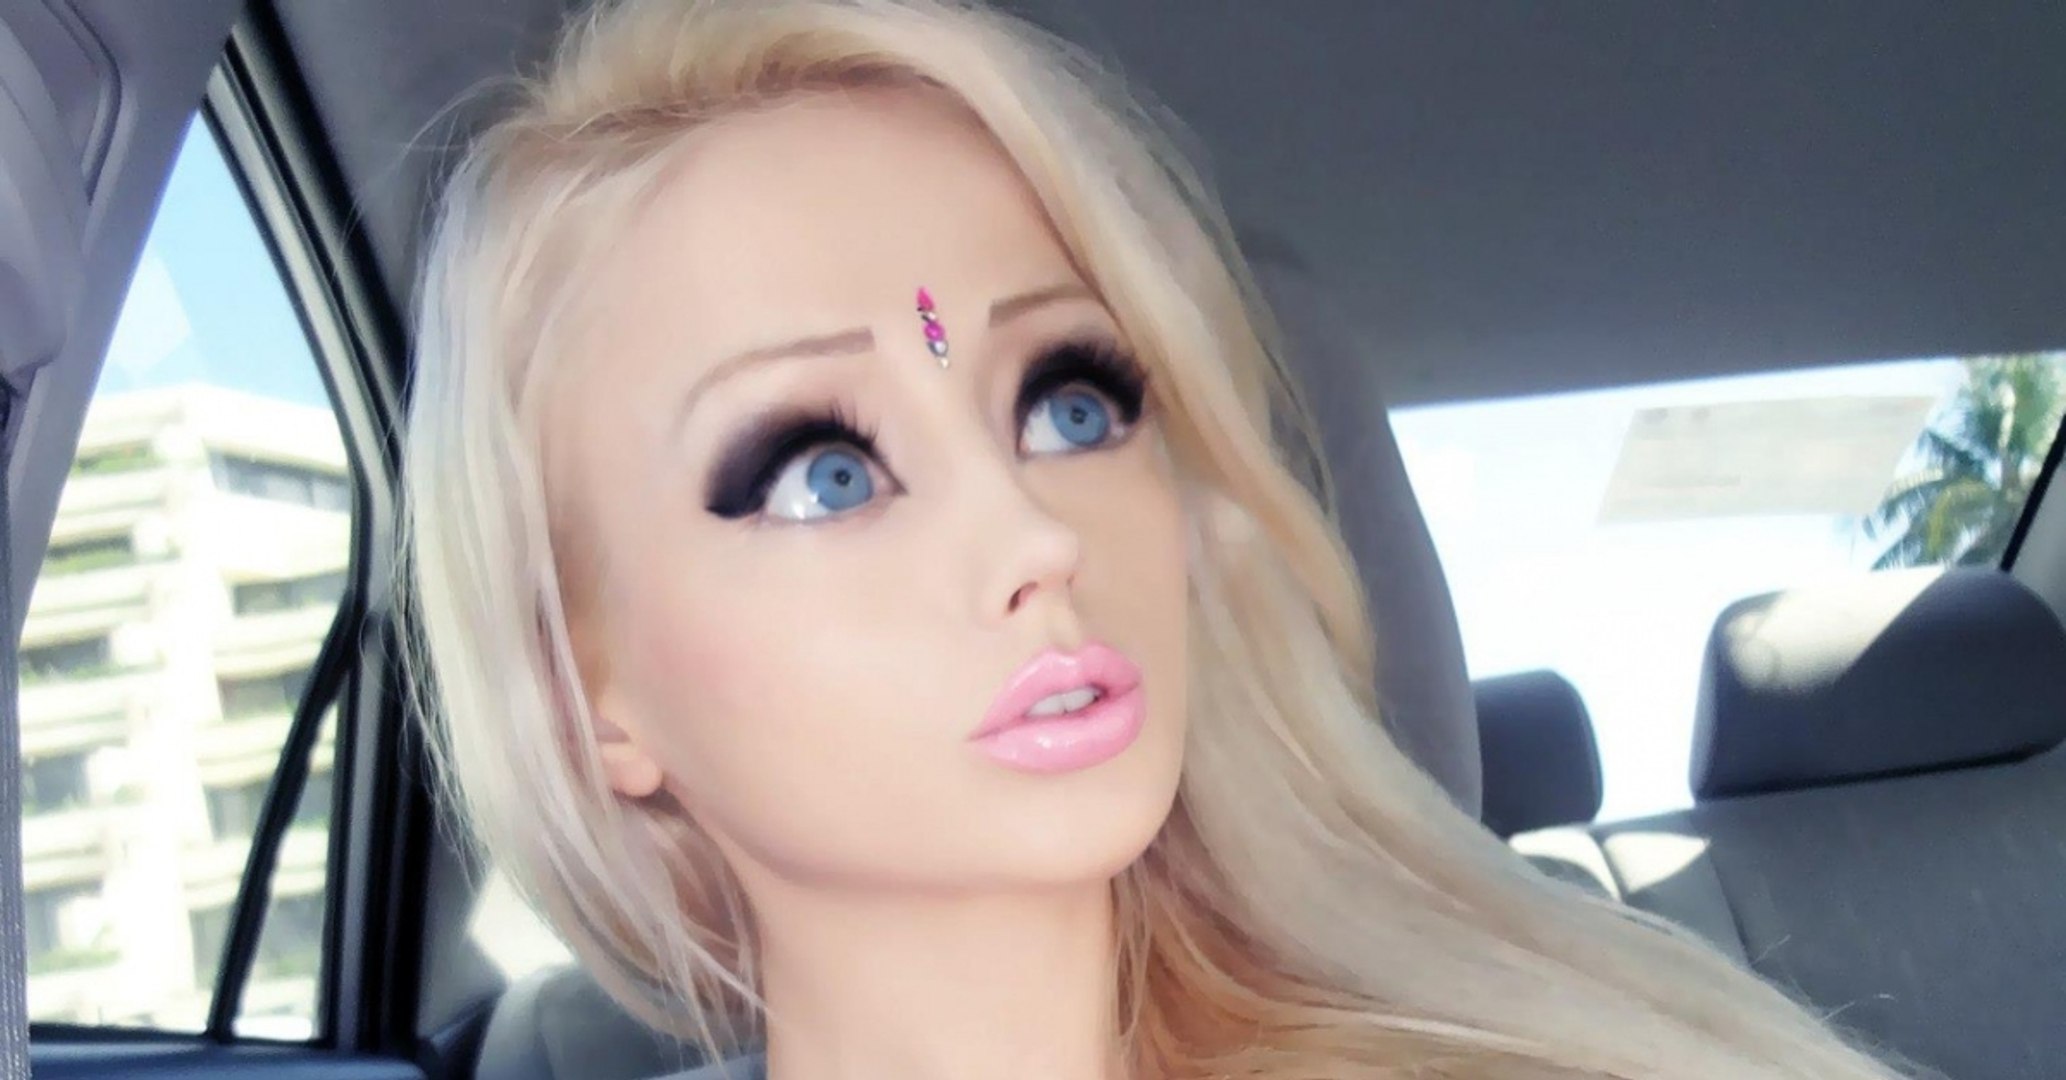 She's A Human Barbie Doll - This Is How She Looks Without Makeup - video  Dailymotion